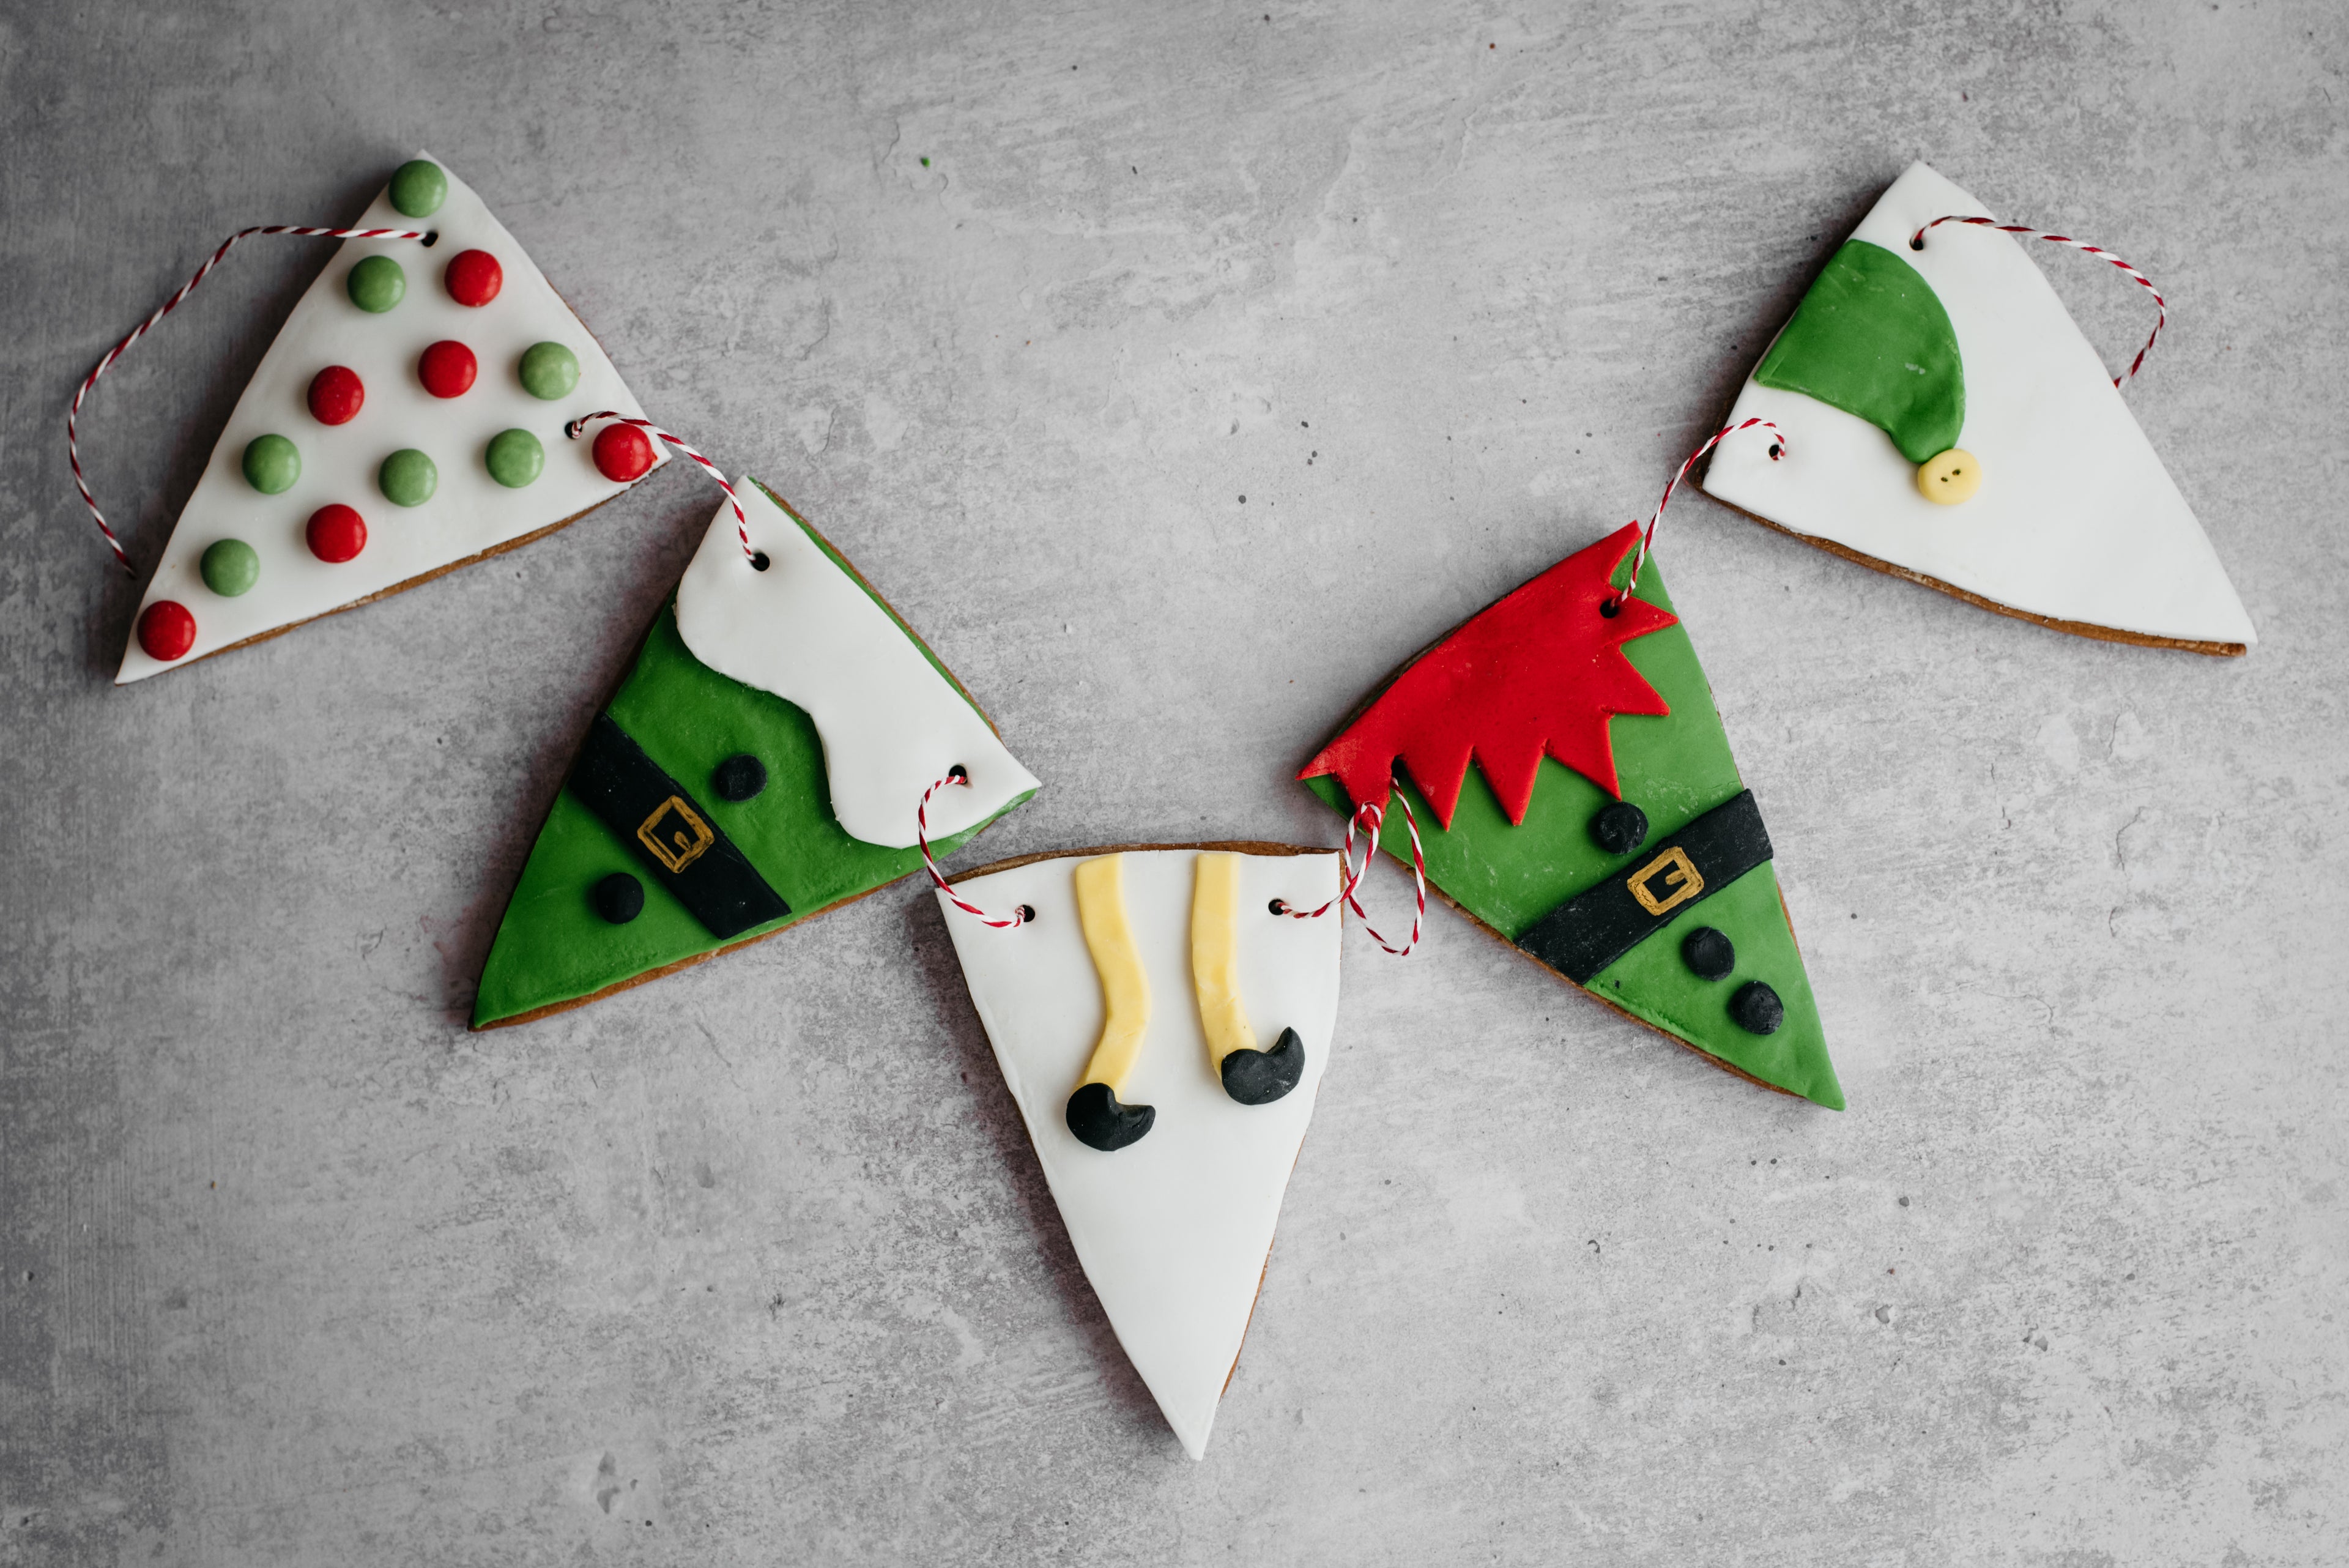 HoHoHo Elf Bunting close up, decorated with elf designs threaded together with red and white twine